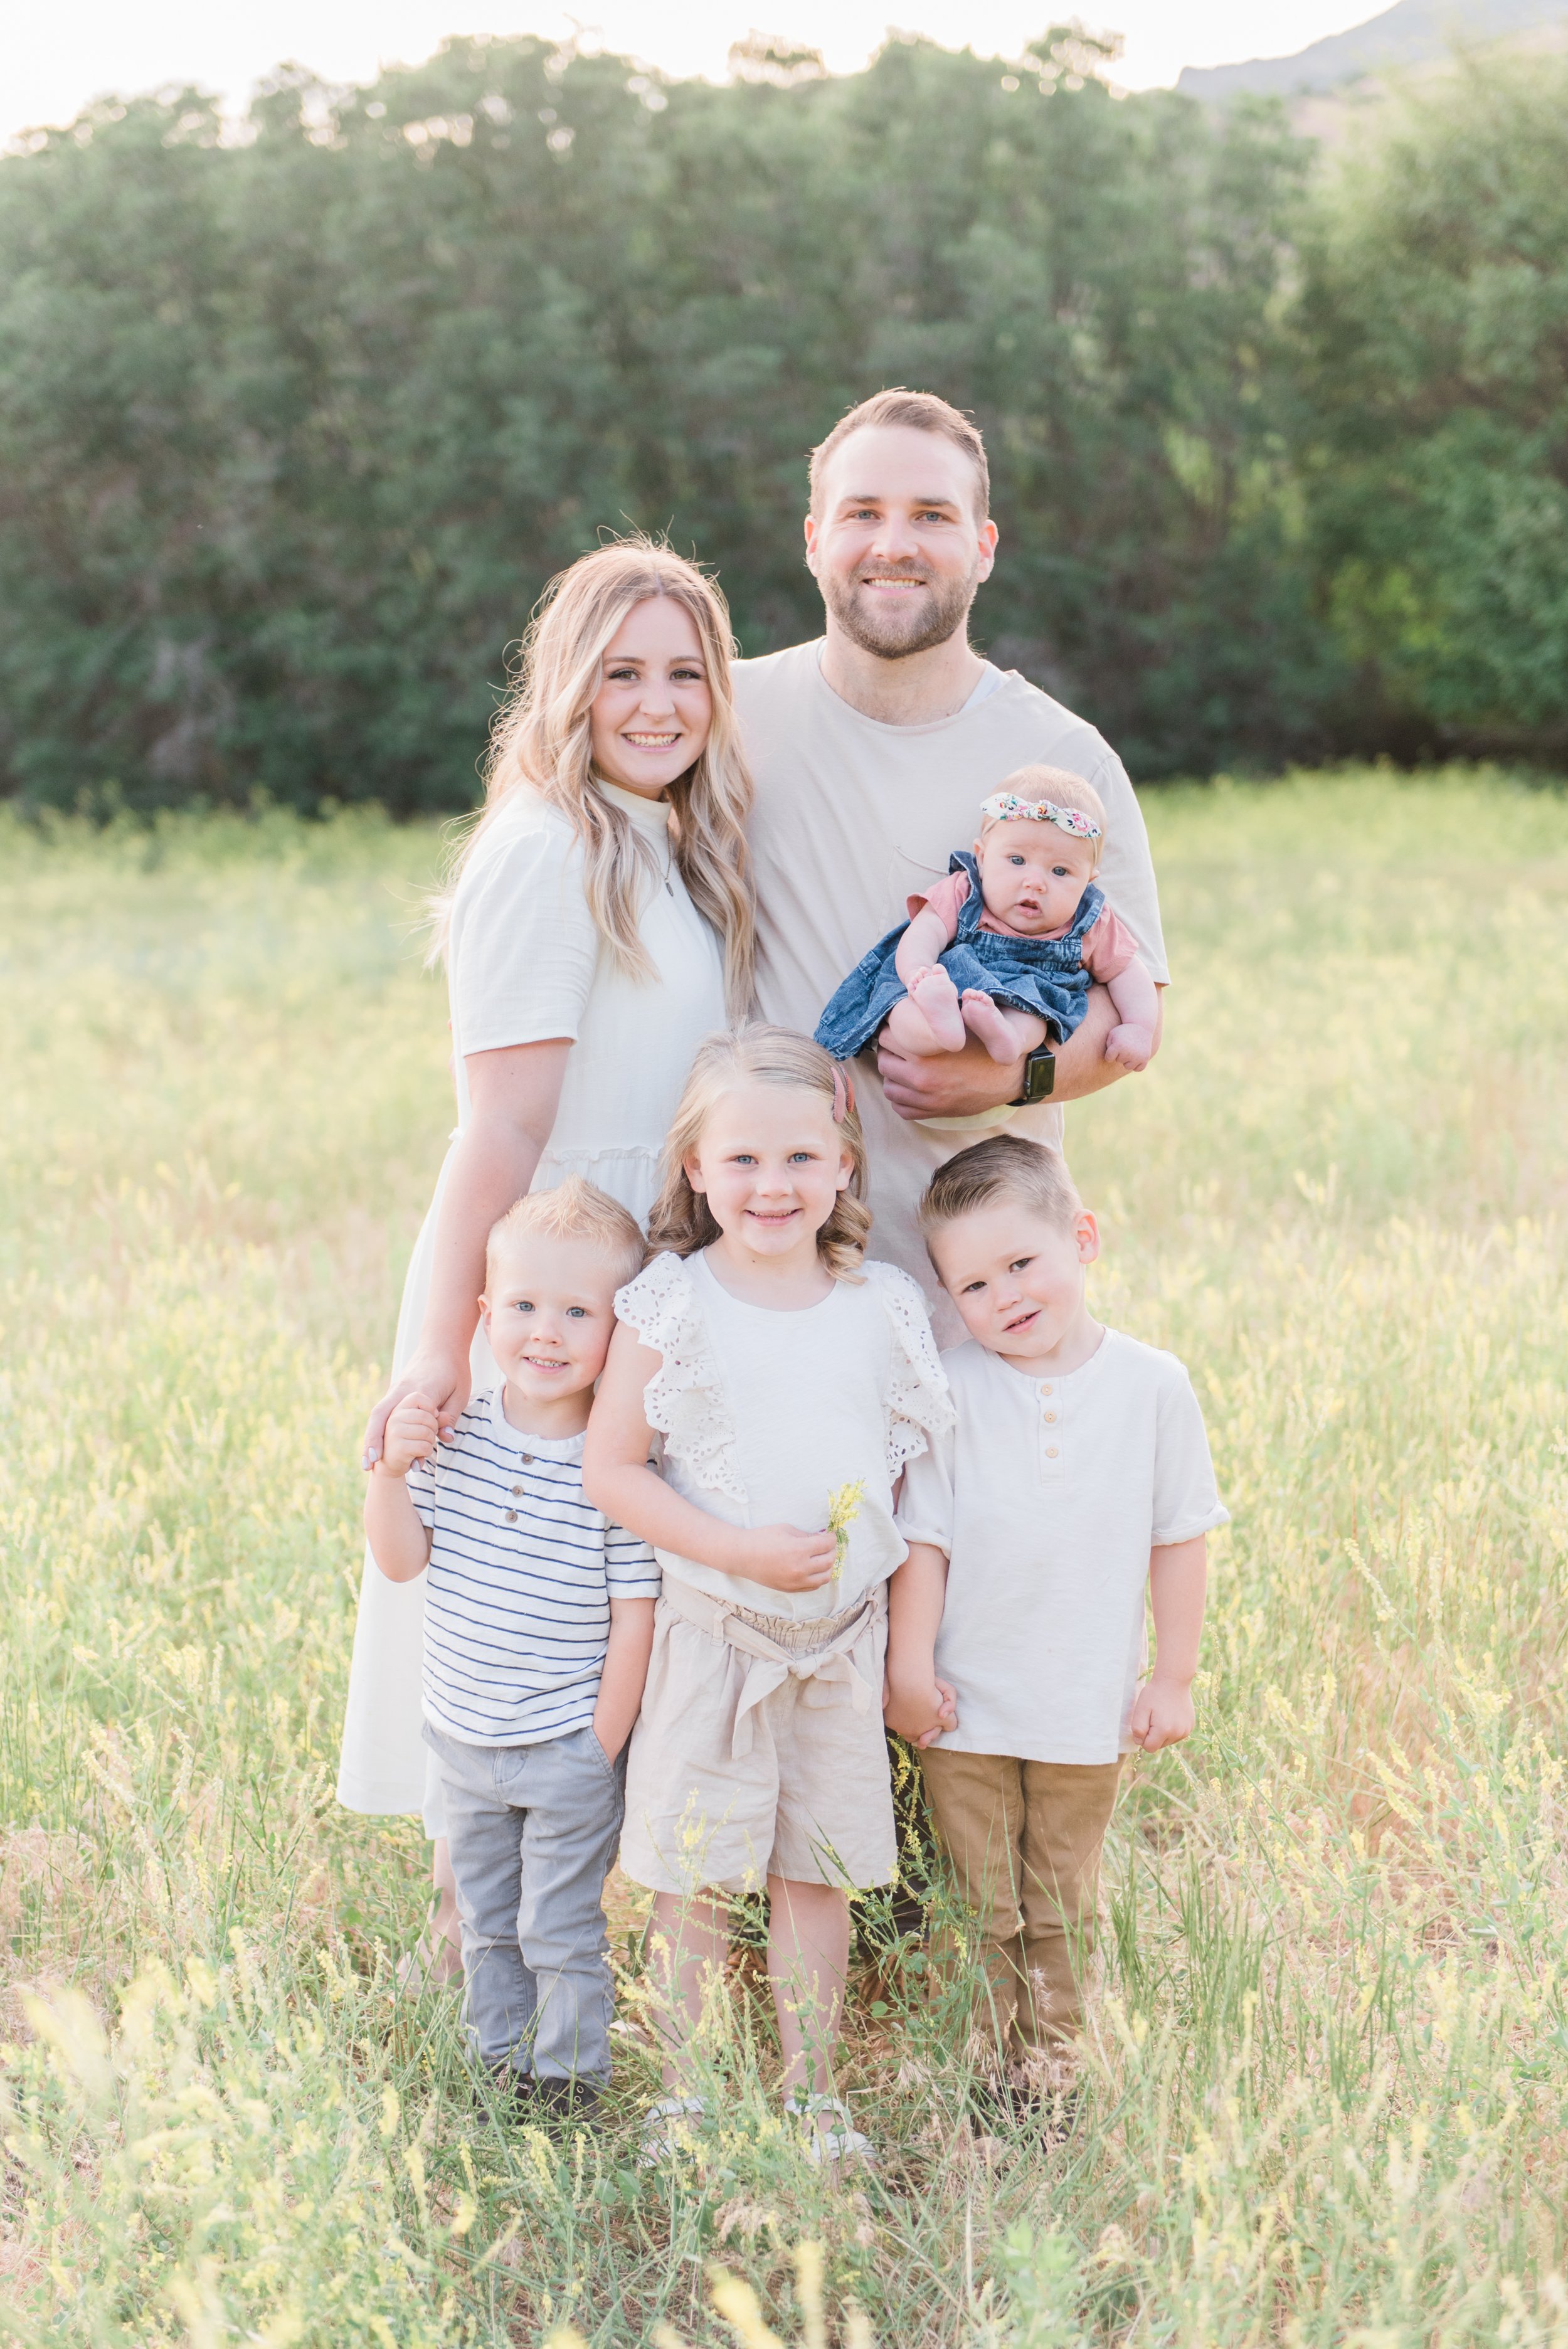  A young family of four smiles together in a meadow during a family photo shoot by Jacquie Erickson, an Atlanta-based photographer. personalized photoshoot #atlantafamilyphotographer #familiesofinstagram #familypics #GeorgiaFamilyPhotographer 